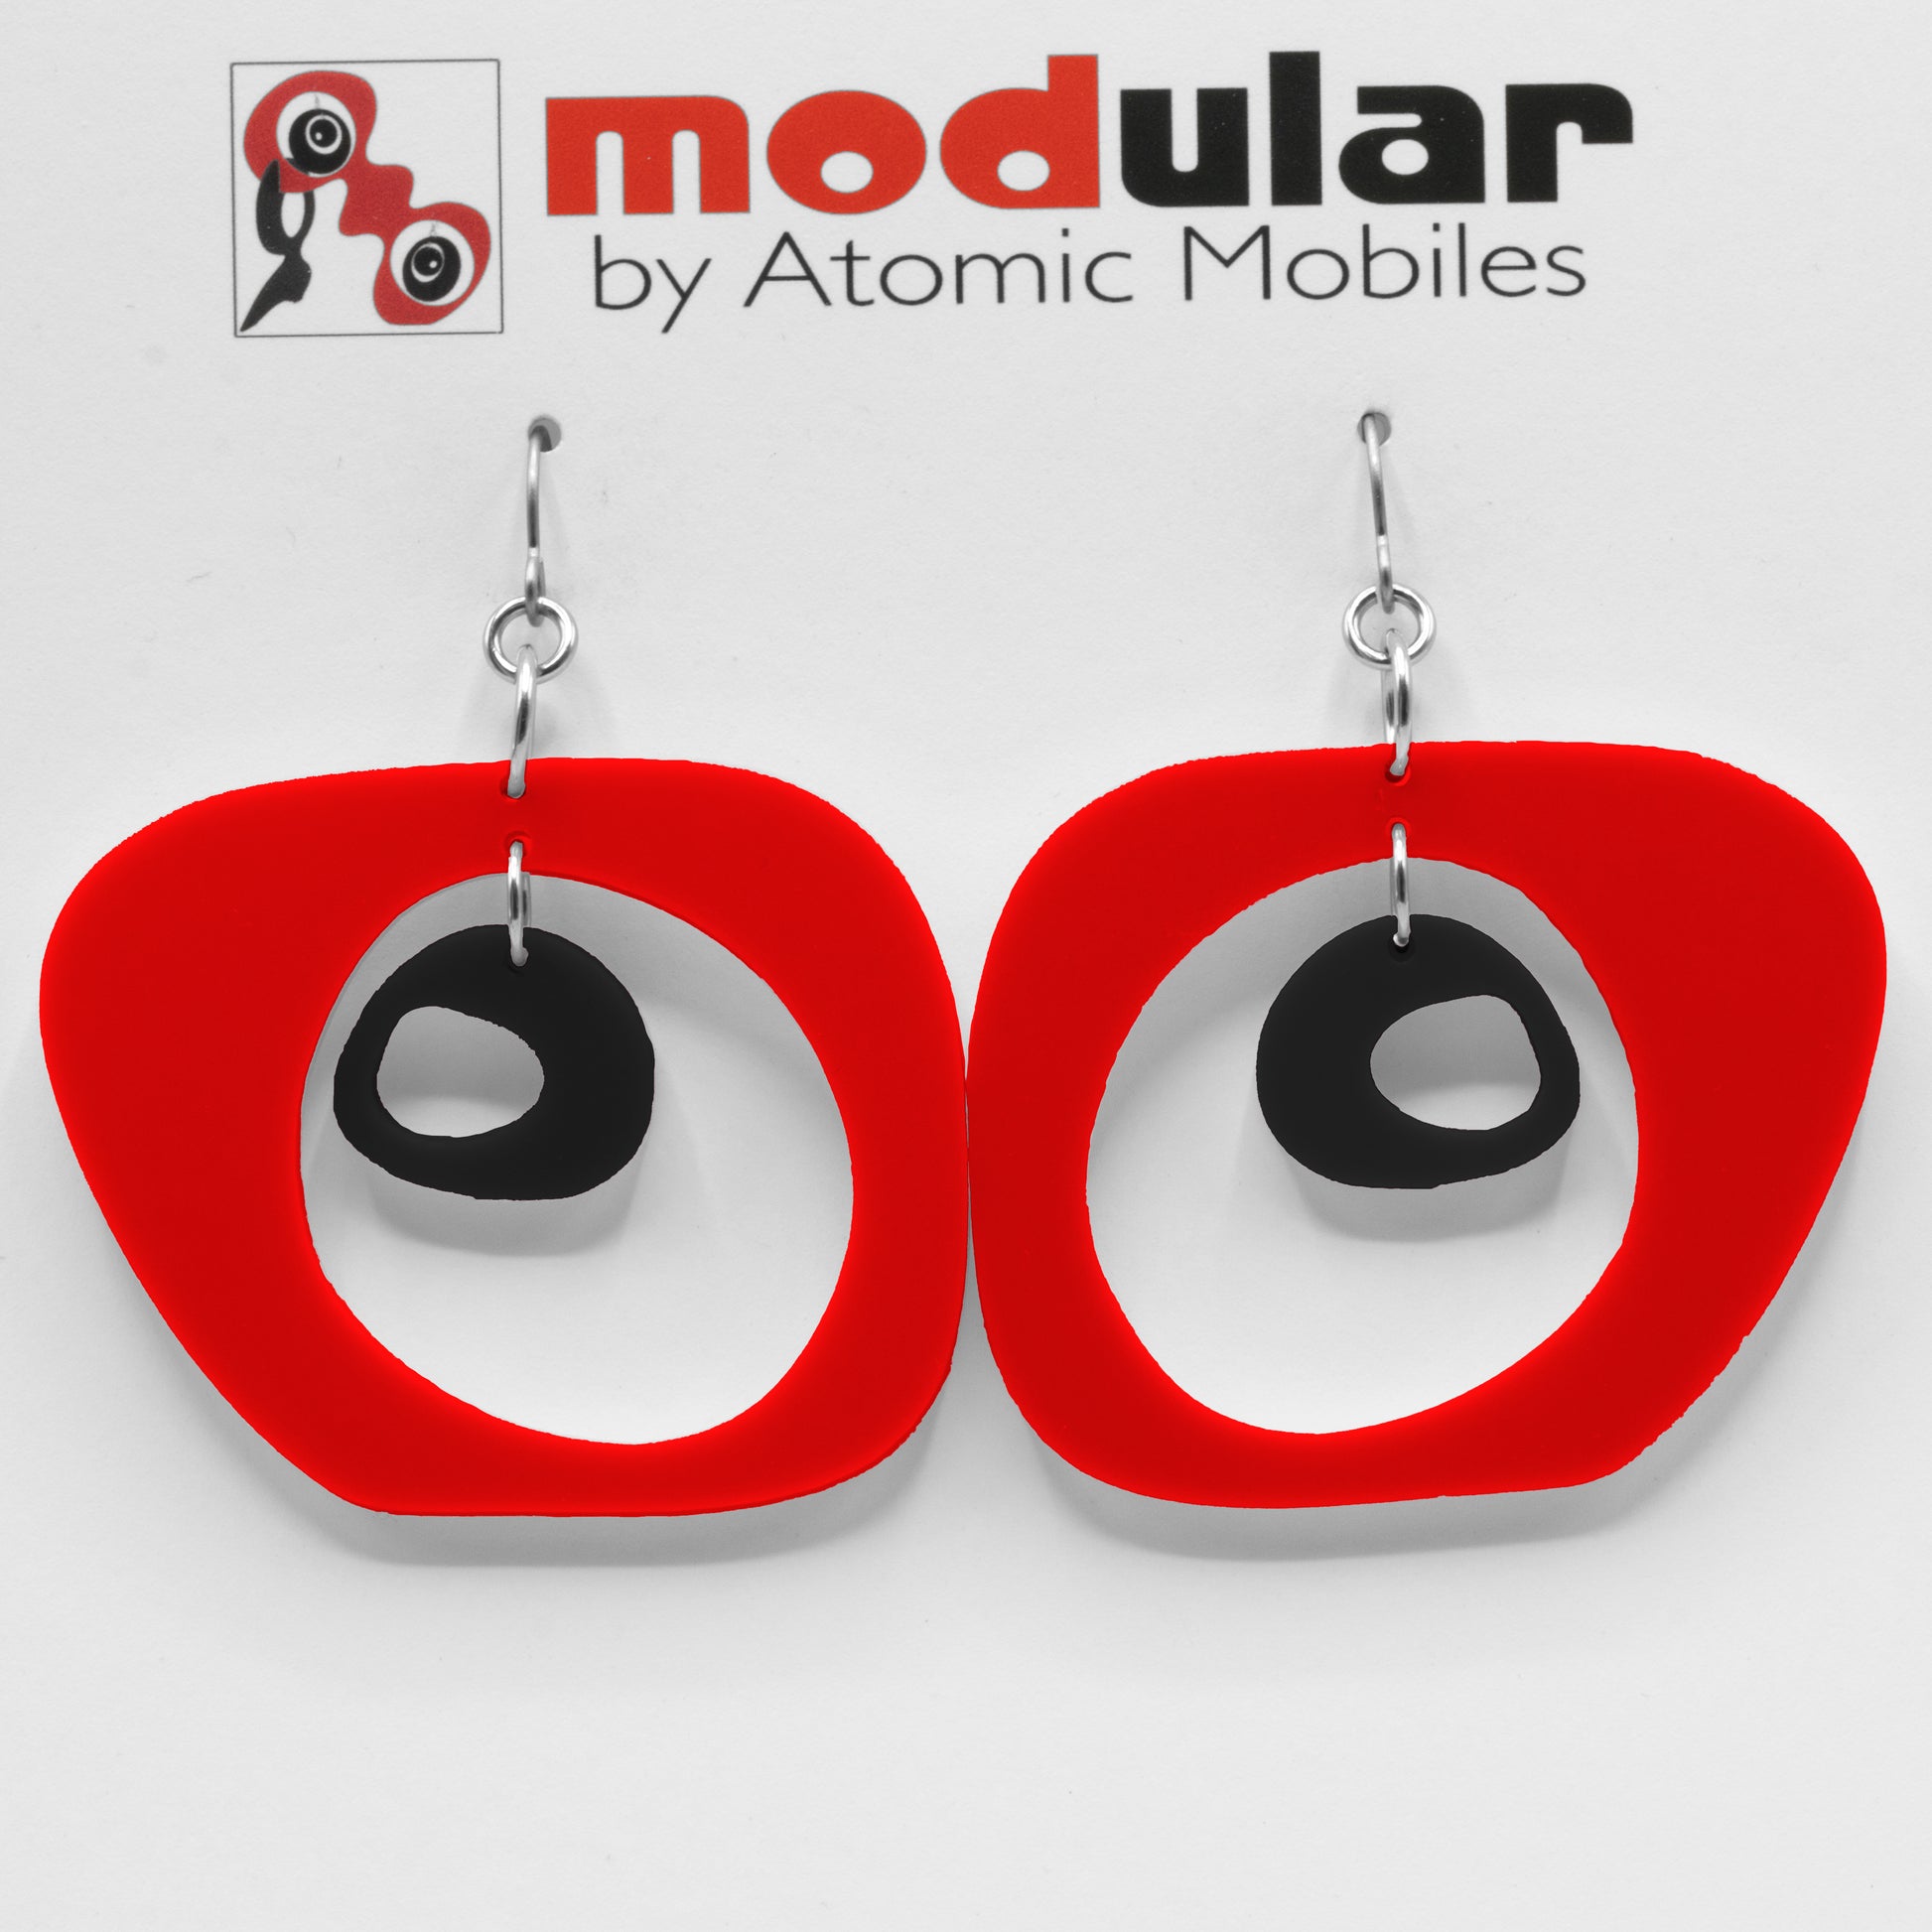 MODular Earrings - Paris Statement Earrings in Red and Black by AtomicMobiles.com - retro era inspired mod handmade jewelry